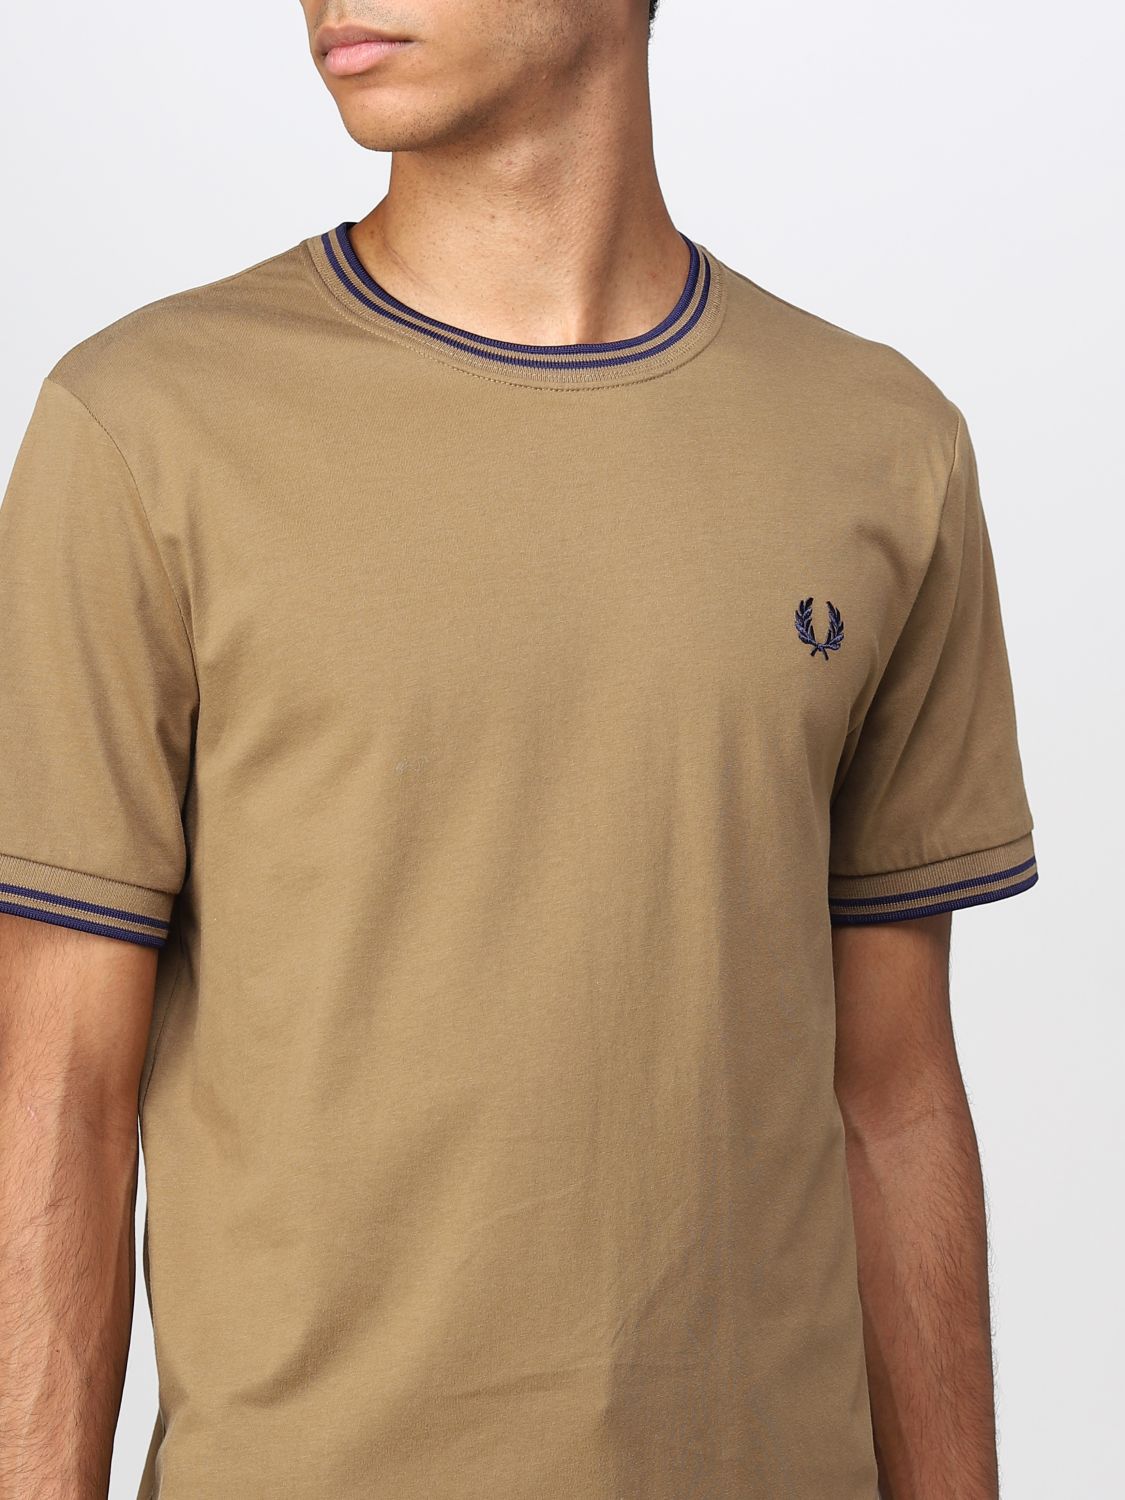 Tシャツ Fred Perry: Tシャツ Fred Perry メンズ ブラウン 3